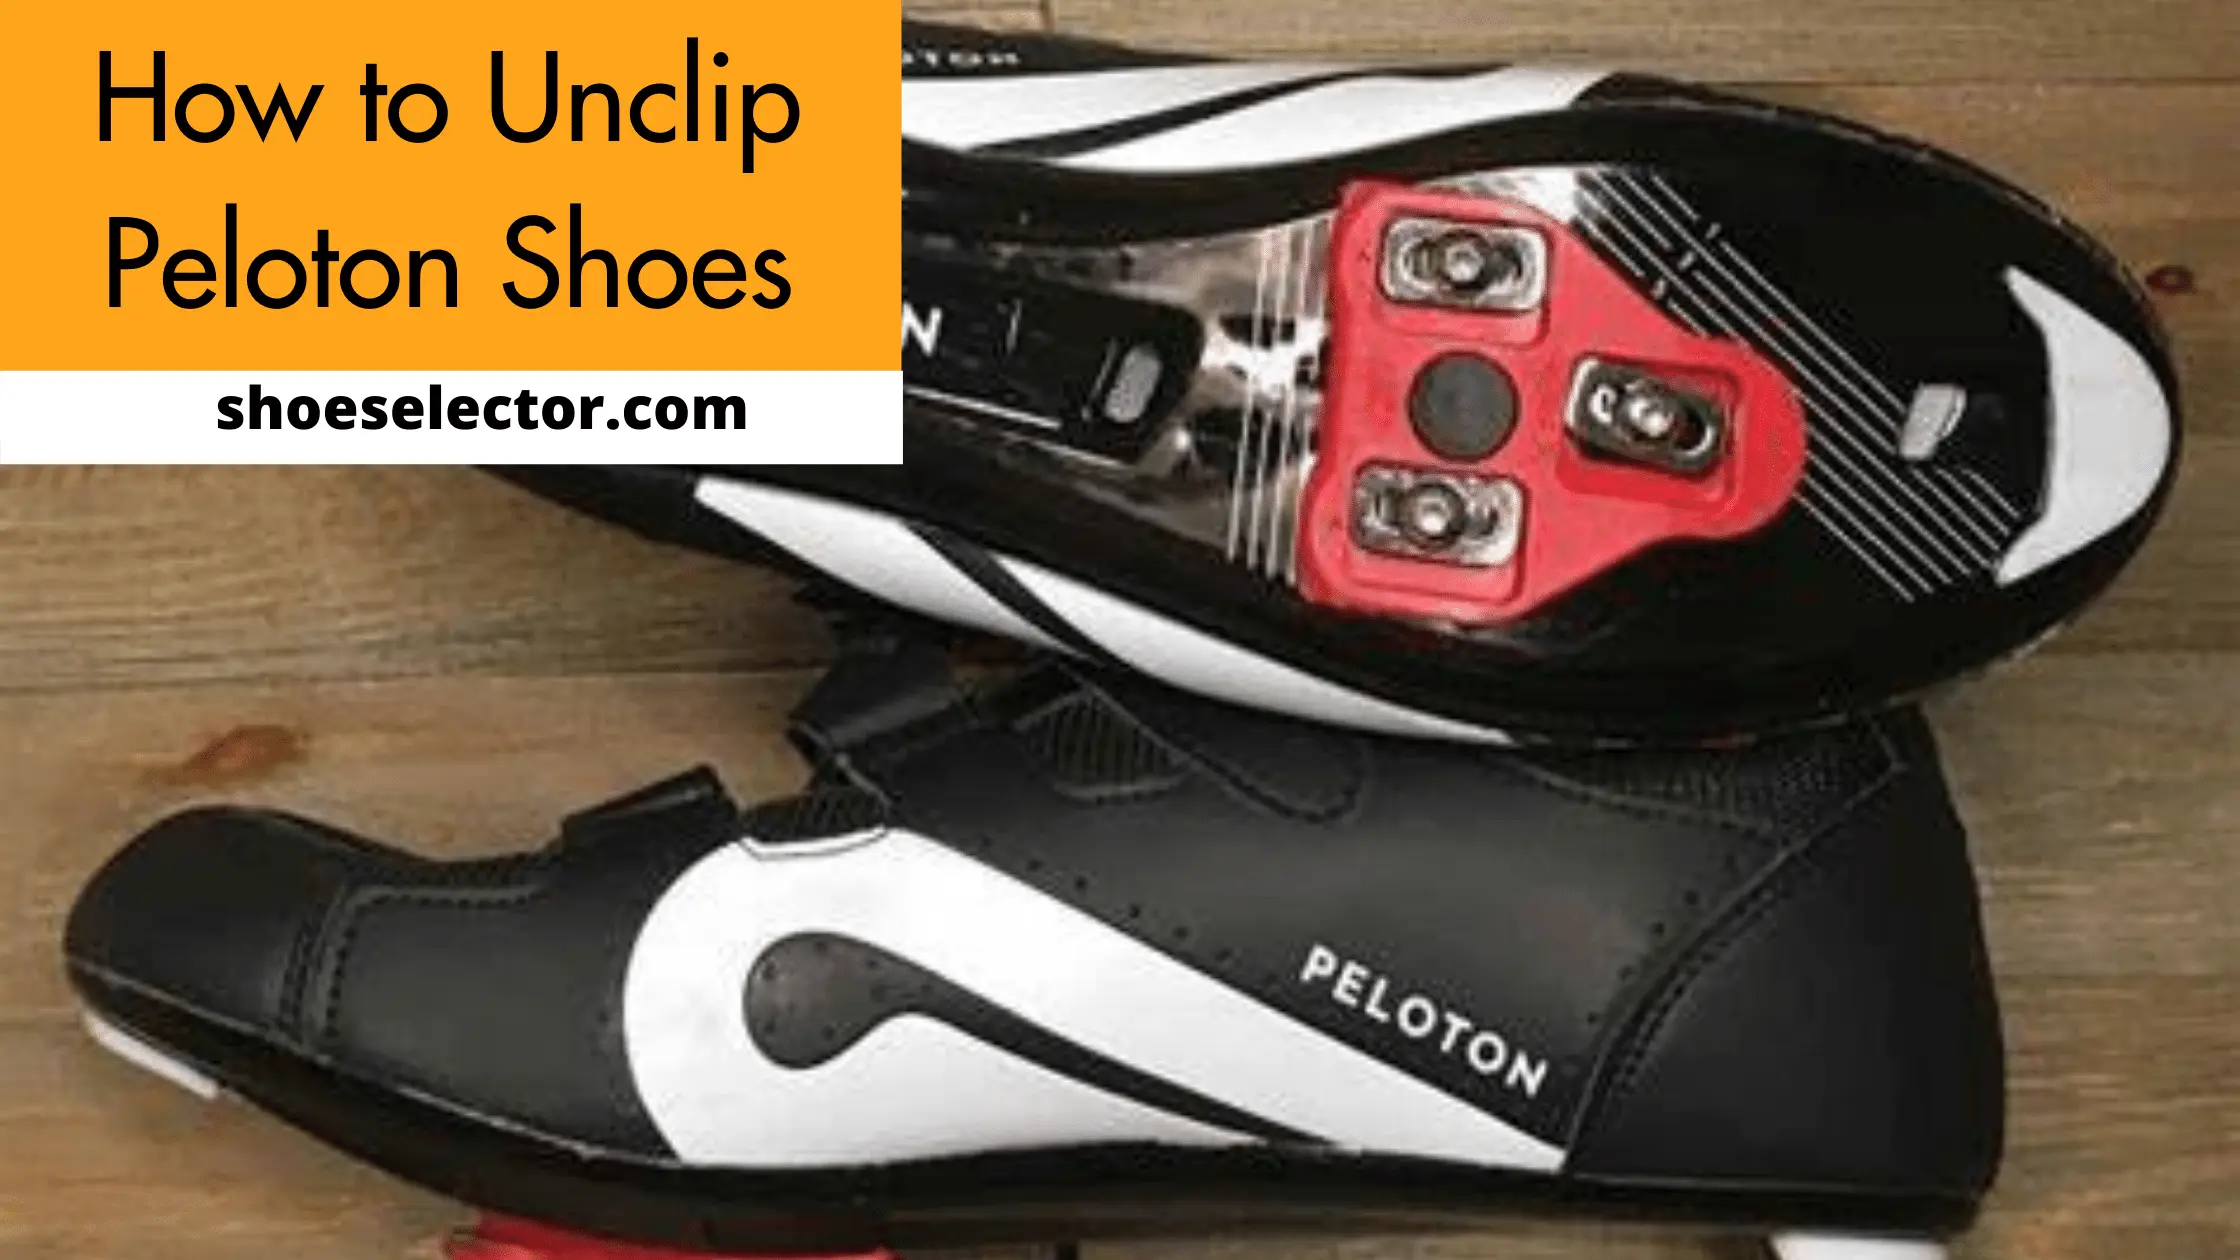 How to Unclip Peloton Shoes | Tips and Tricks for Getting Your Foot Out Quickly